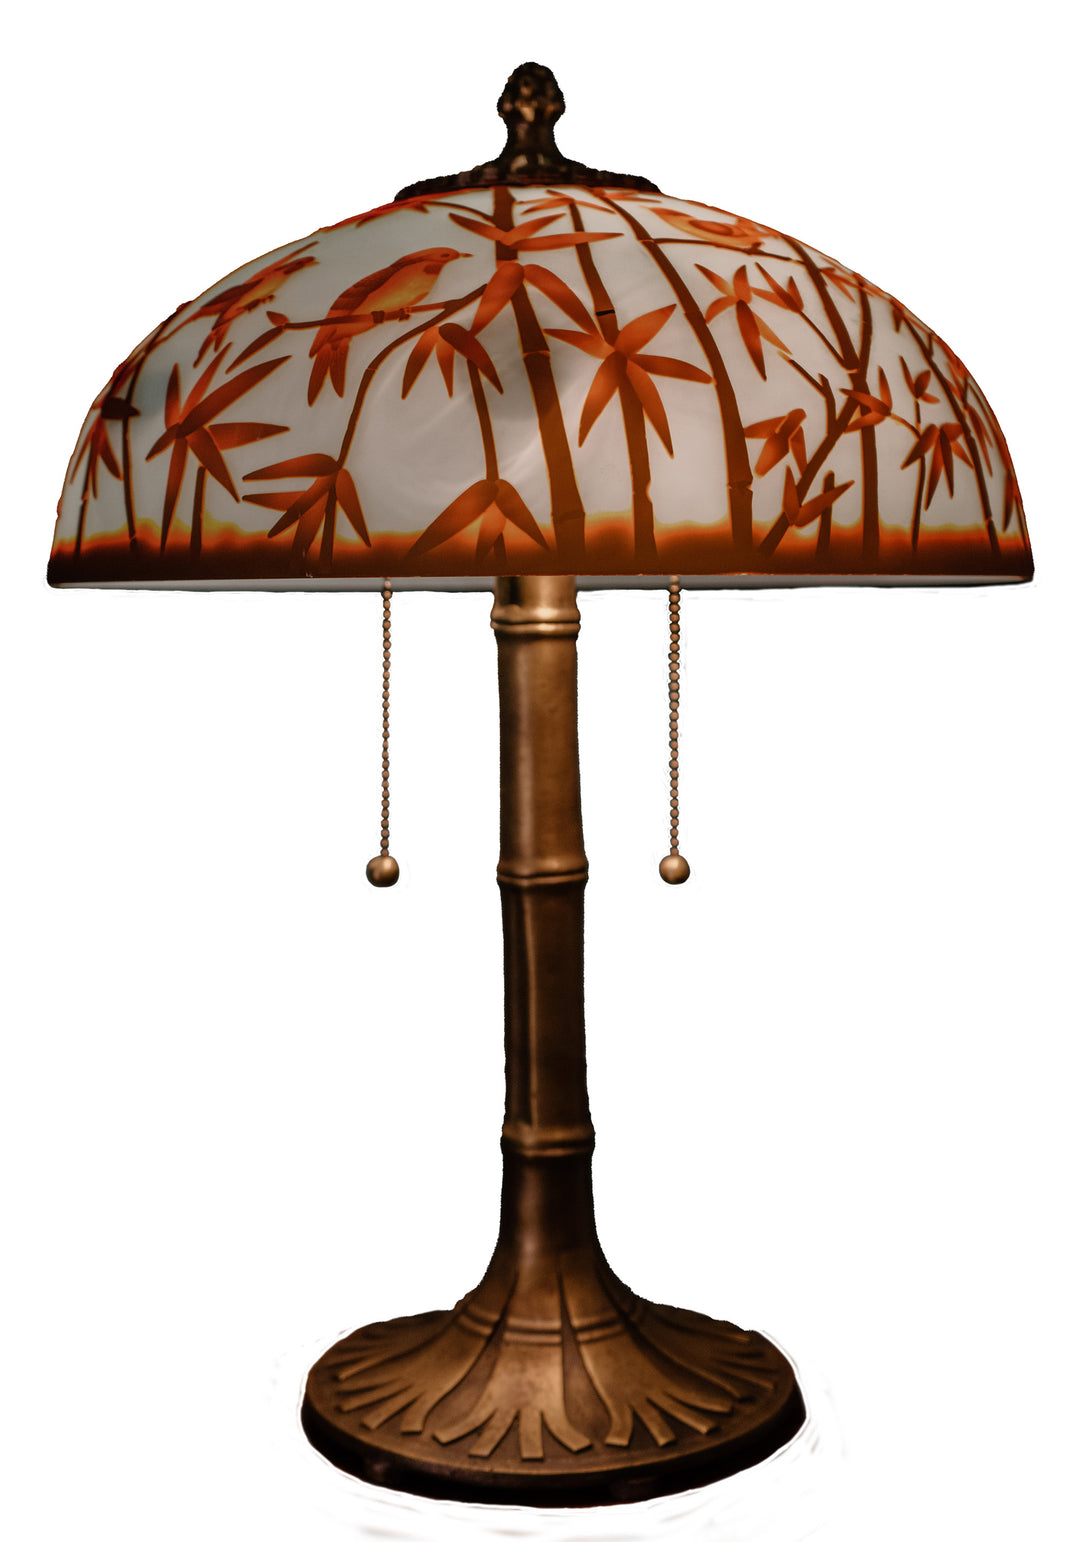 Exceptional American Cameo Glass Lamp in the Manner of Tiffany c. 1910 with Matching Base